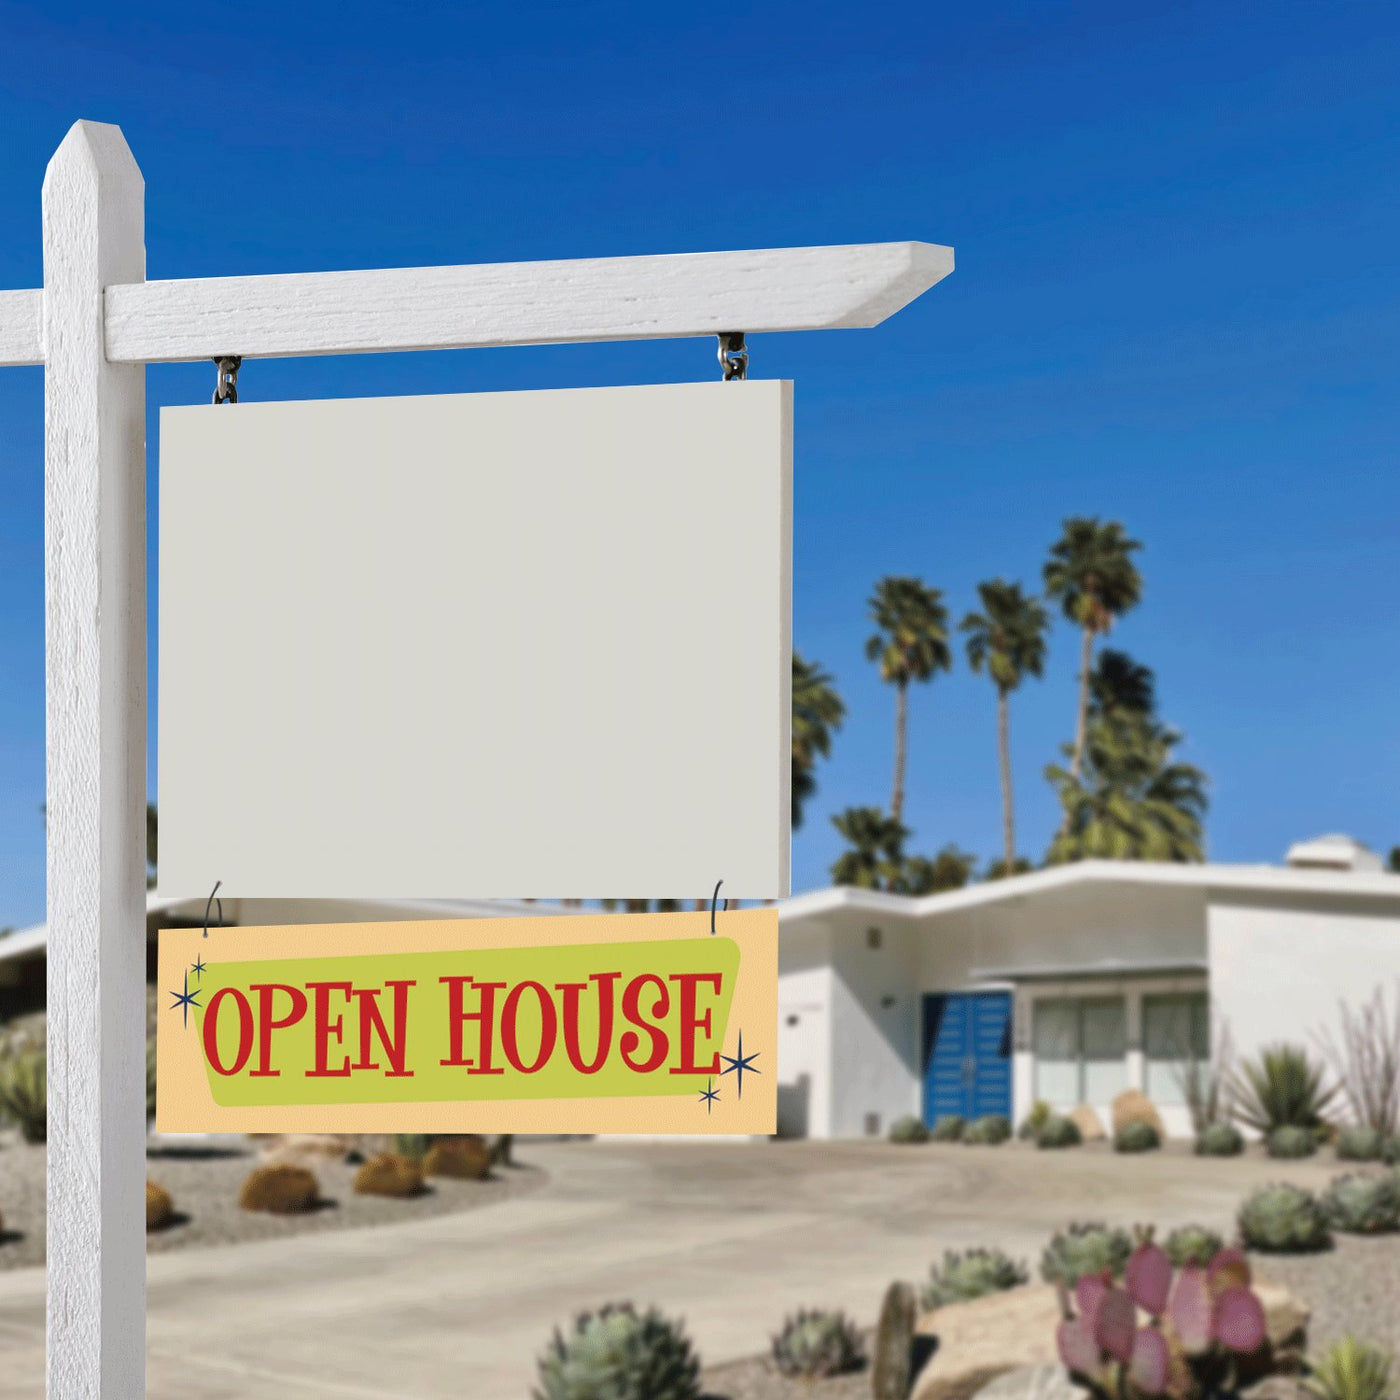 Open House - Mid Century - All Things Real Estate